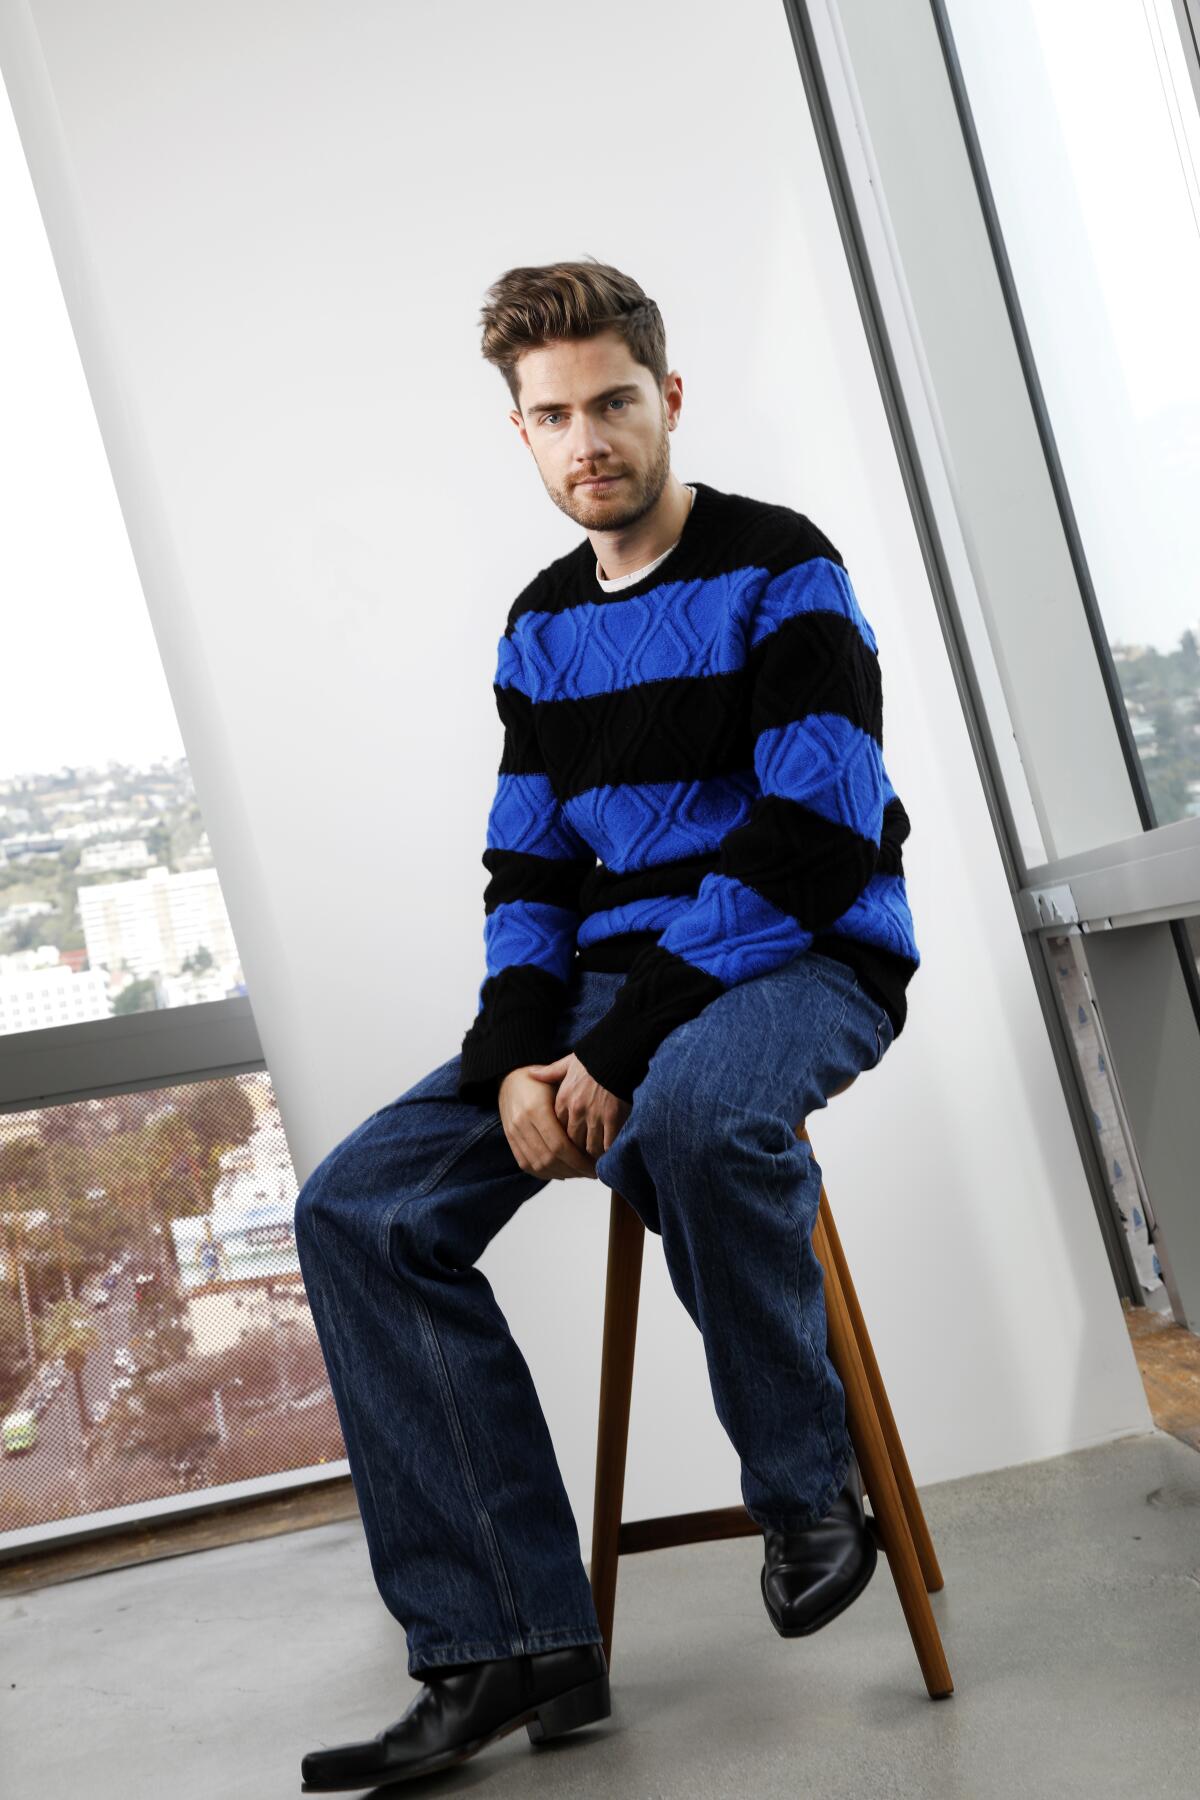 A man wearing a blue striped sweater and jeans sits on a stool.